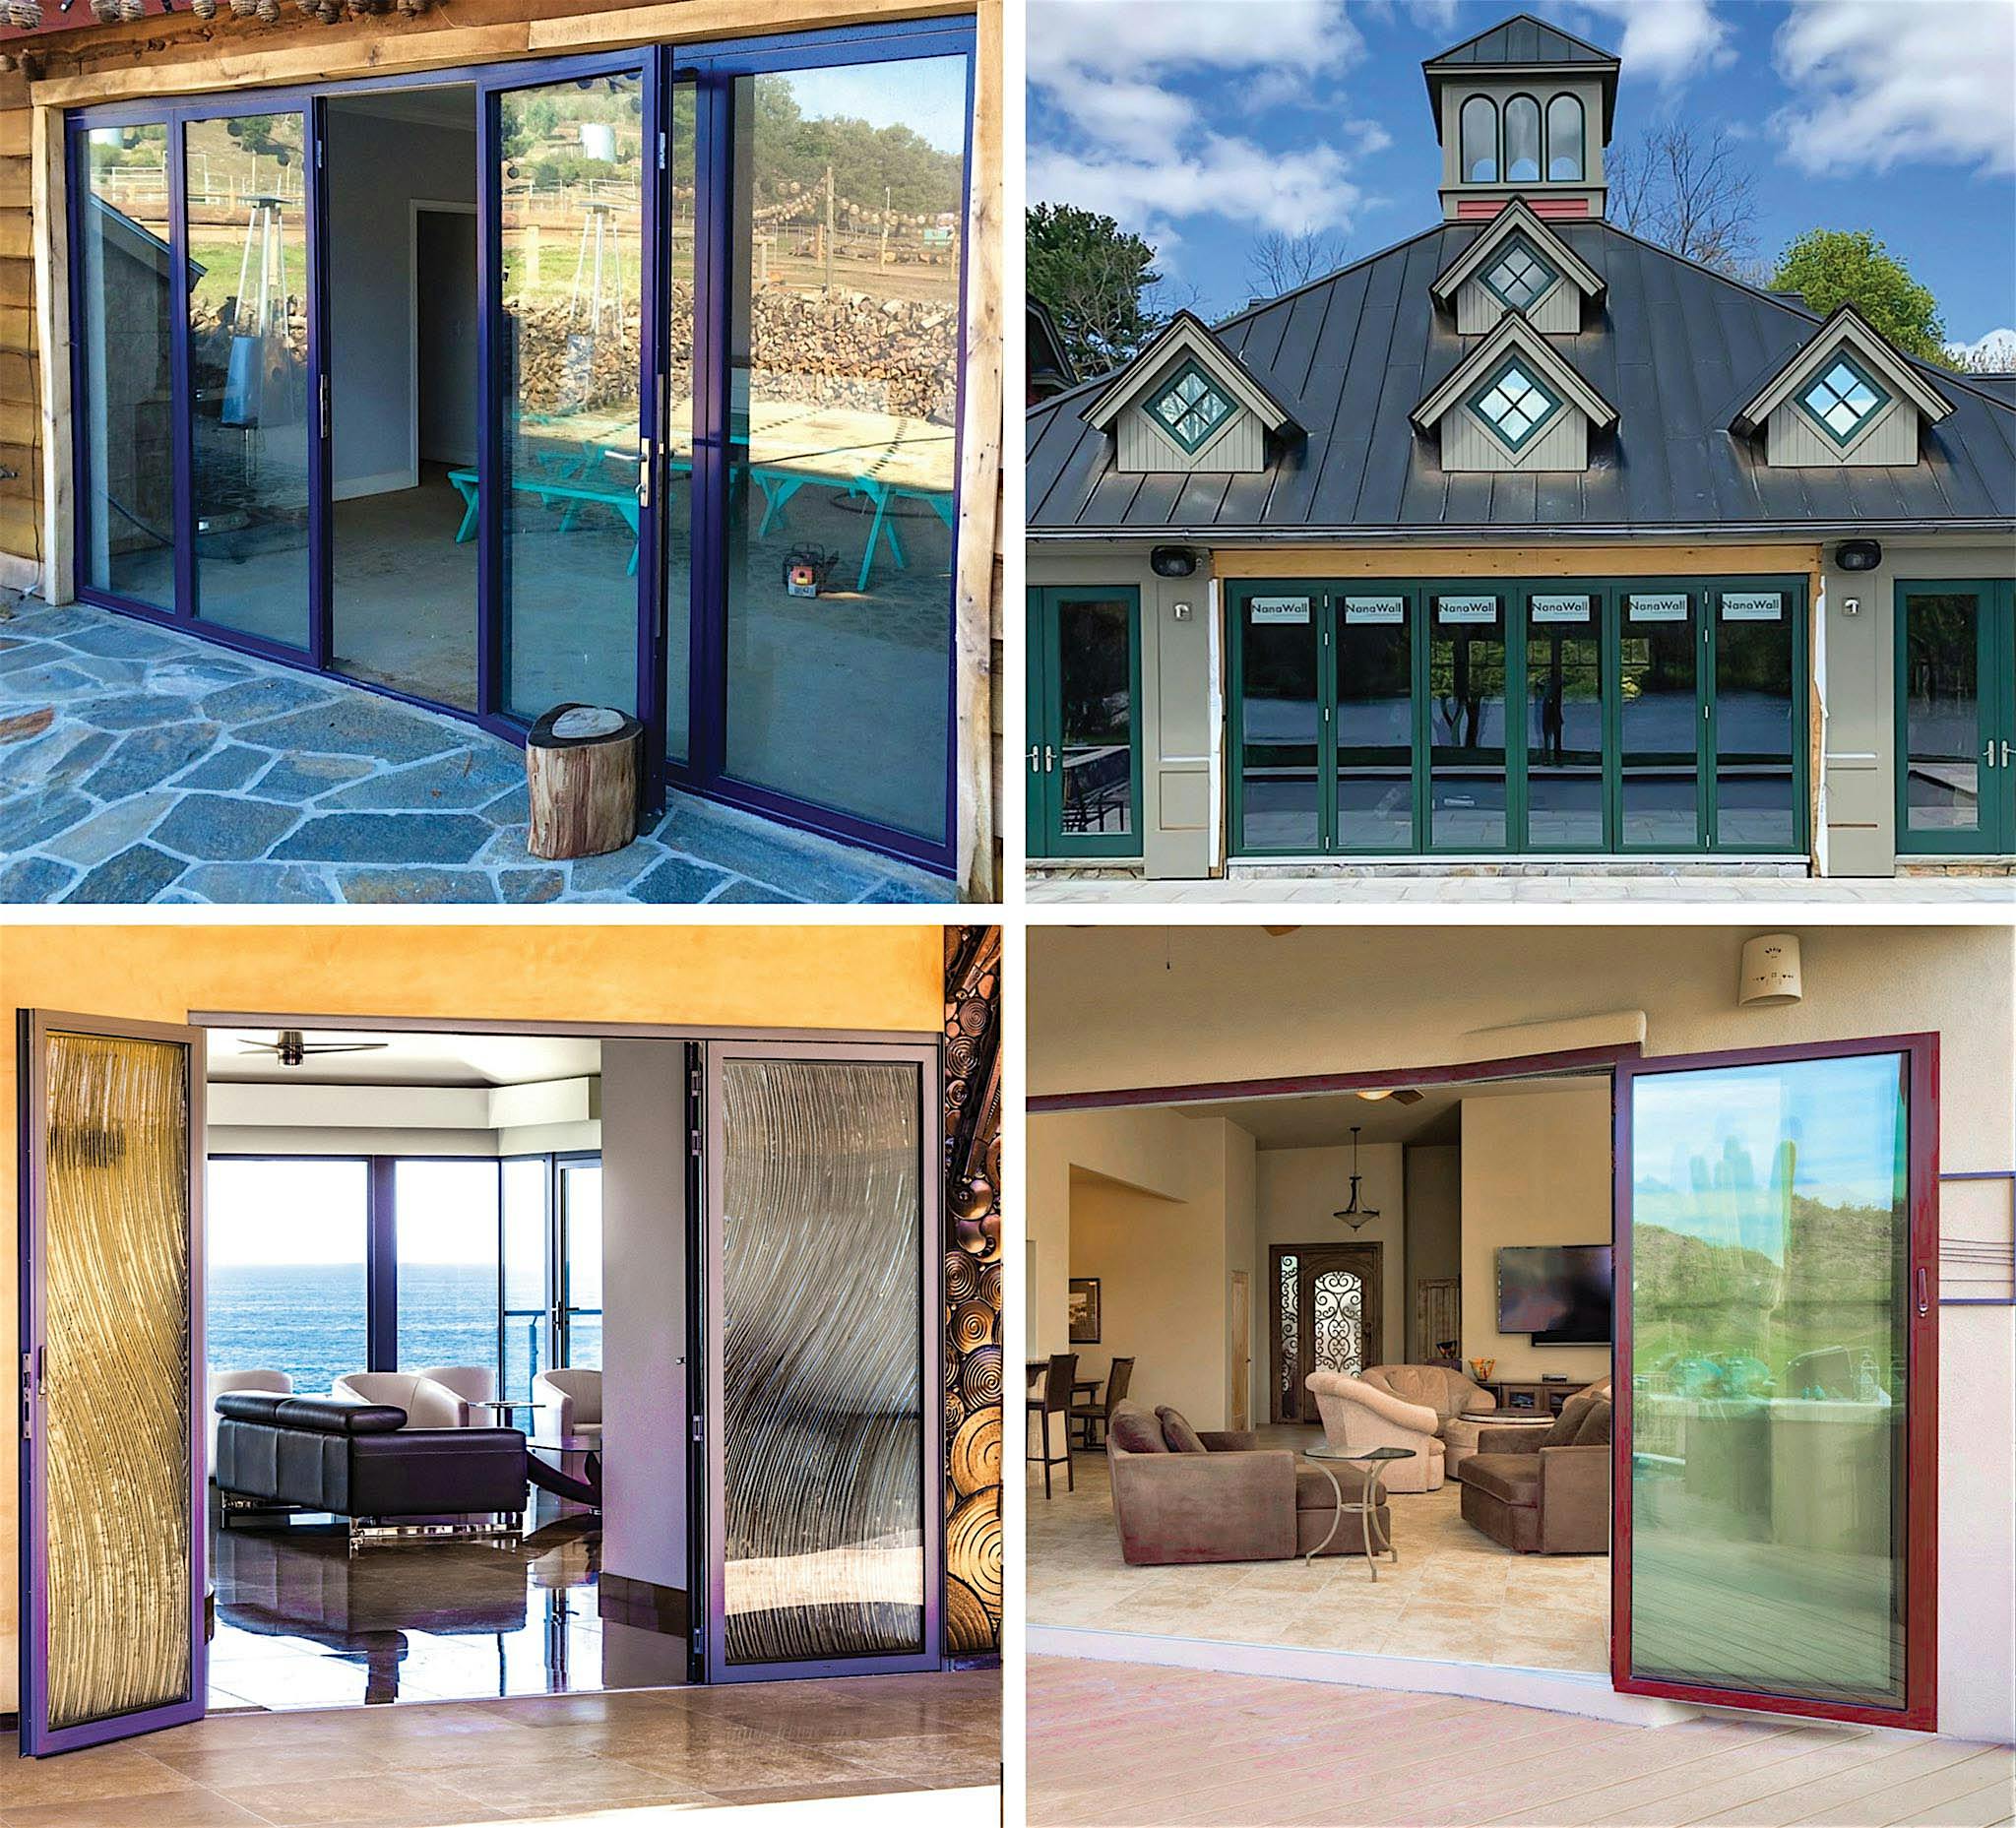 residential projects with colorful glass wall systems with powder coating finish